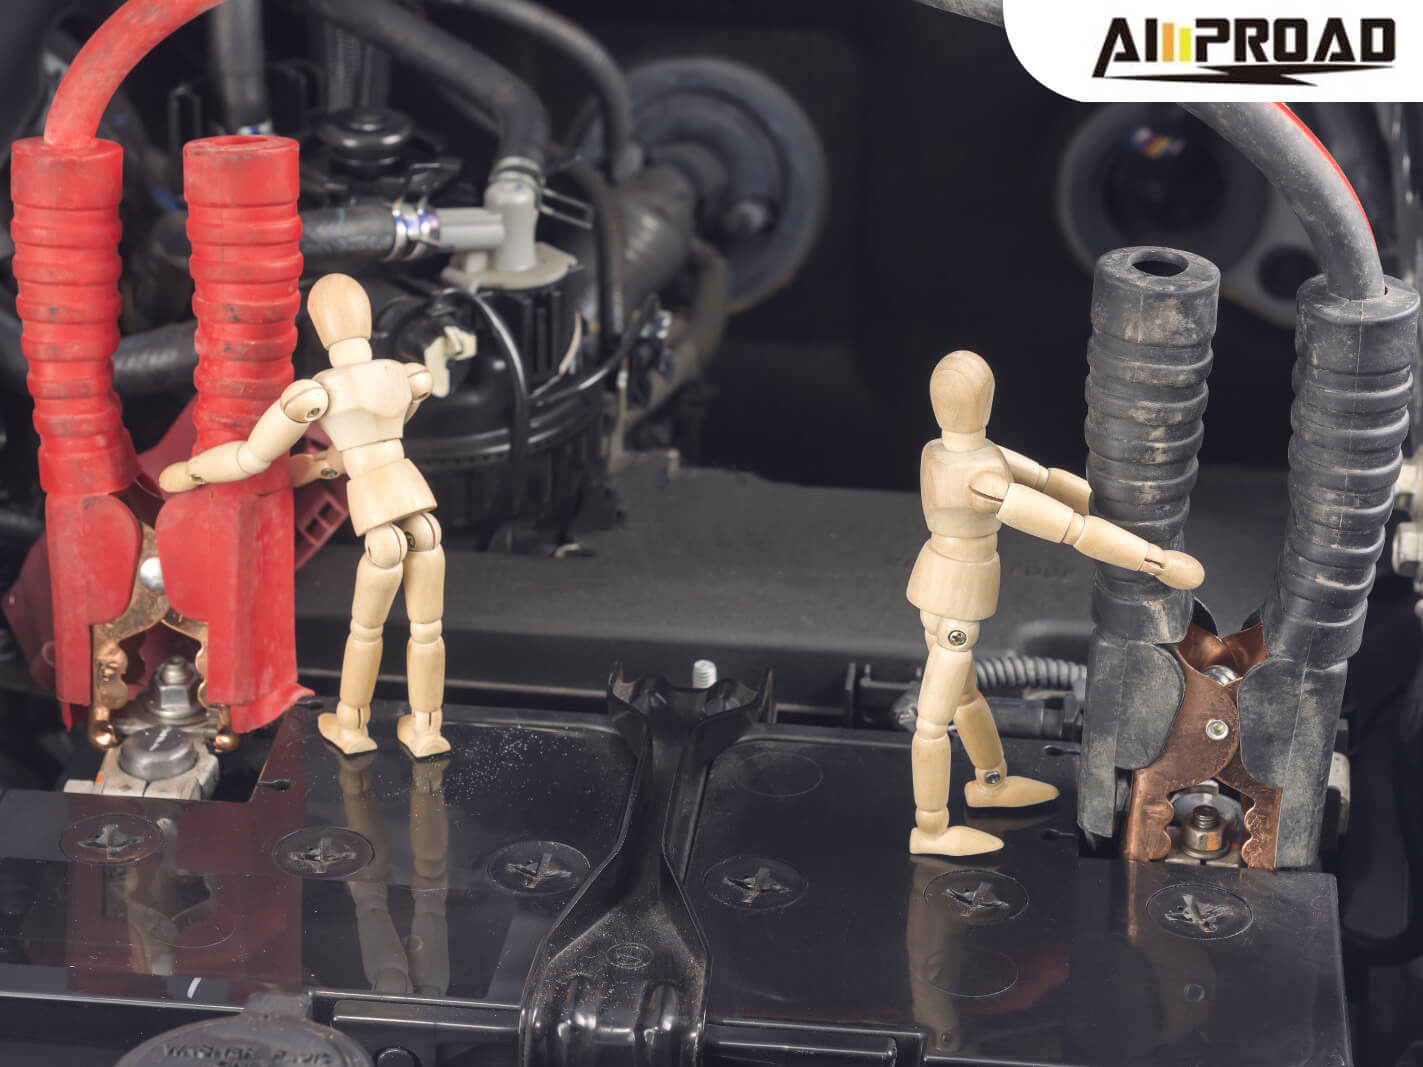 What Is the Differences Among Jump Starter, Jumper Cables, and Jump Box